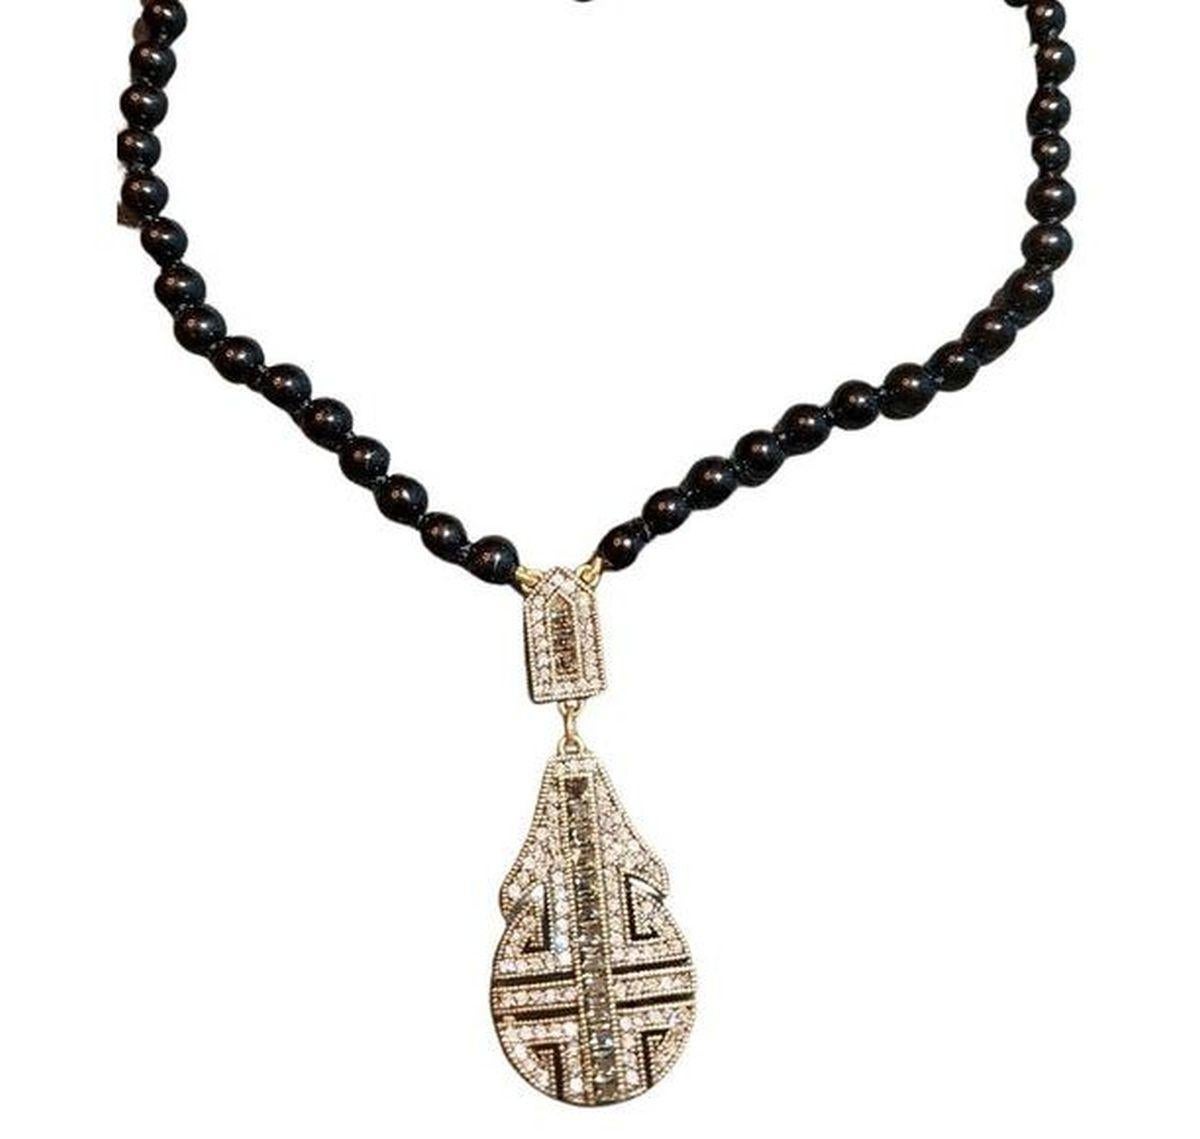 Simply Beautiful! Signed Heidi Daus Designer Black Bead Necklace suspending an Art Deco Revival Sparkling Crystals Pendant. Gold tone setting. Signed HEIDI DAUS. Necklace measures approx. 18” long; with extender chain allows adjustable length(s) up